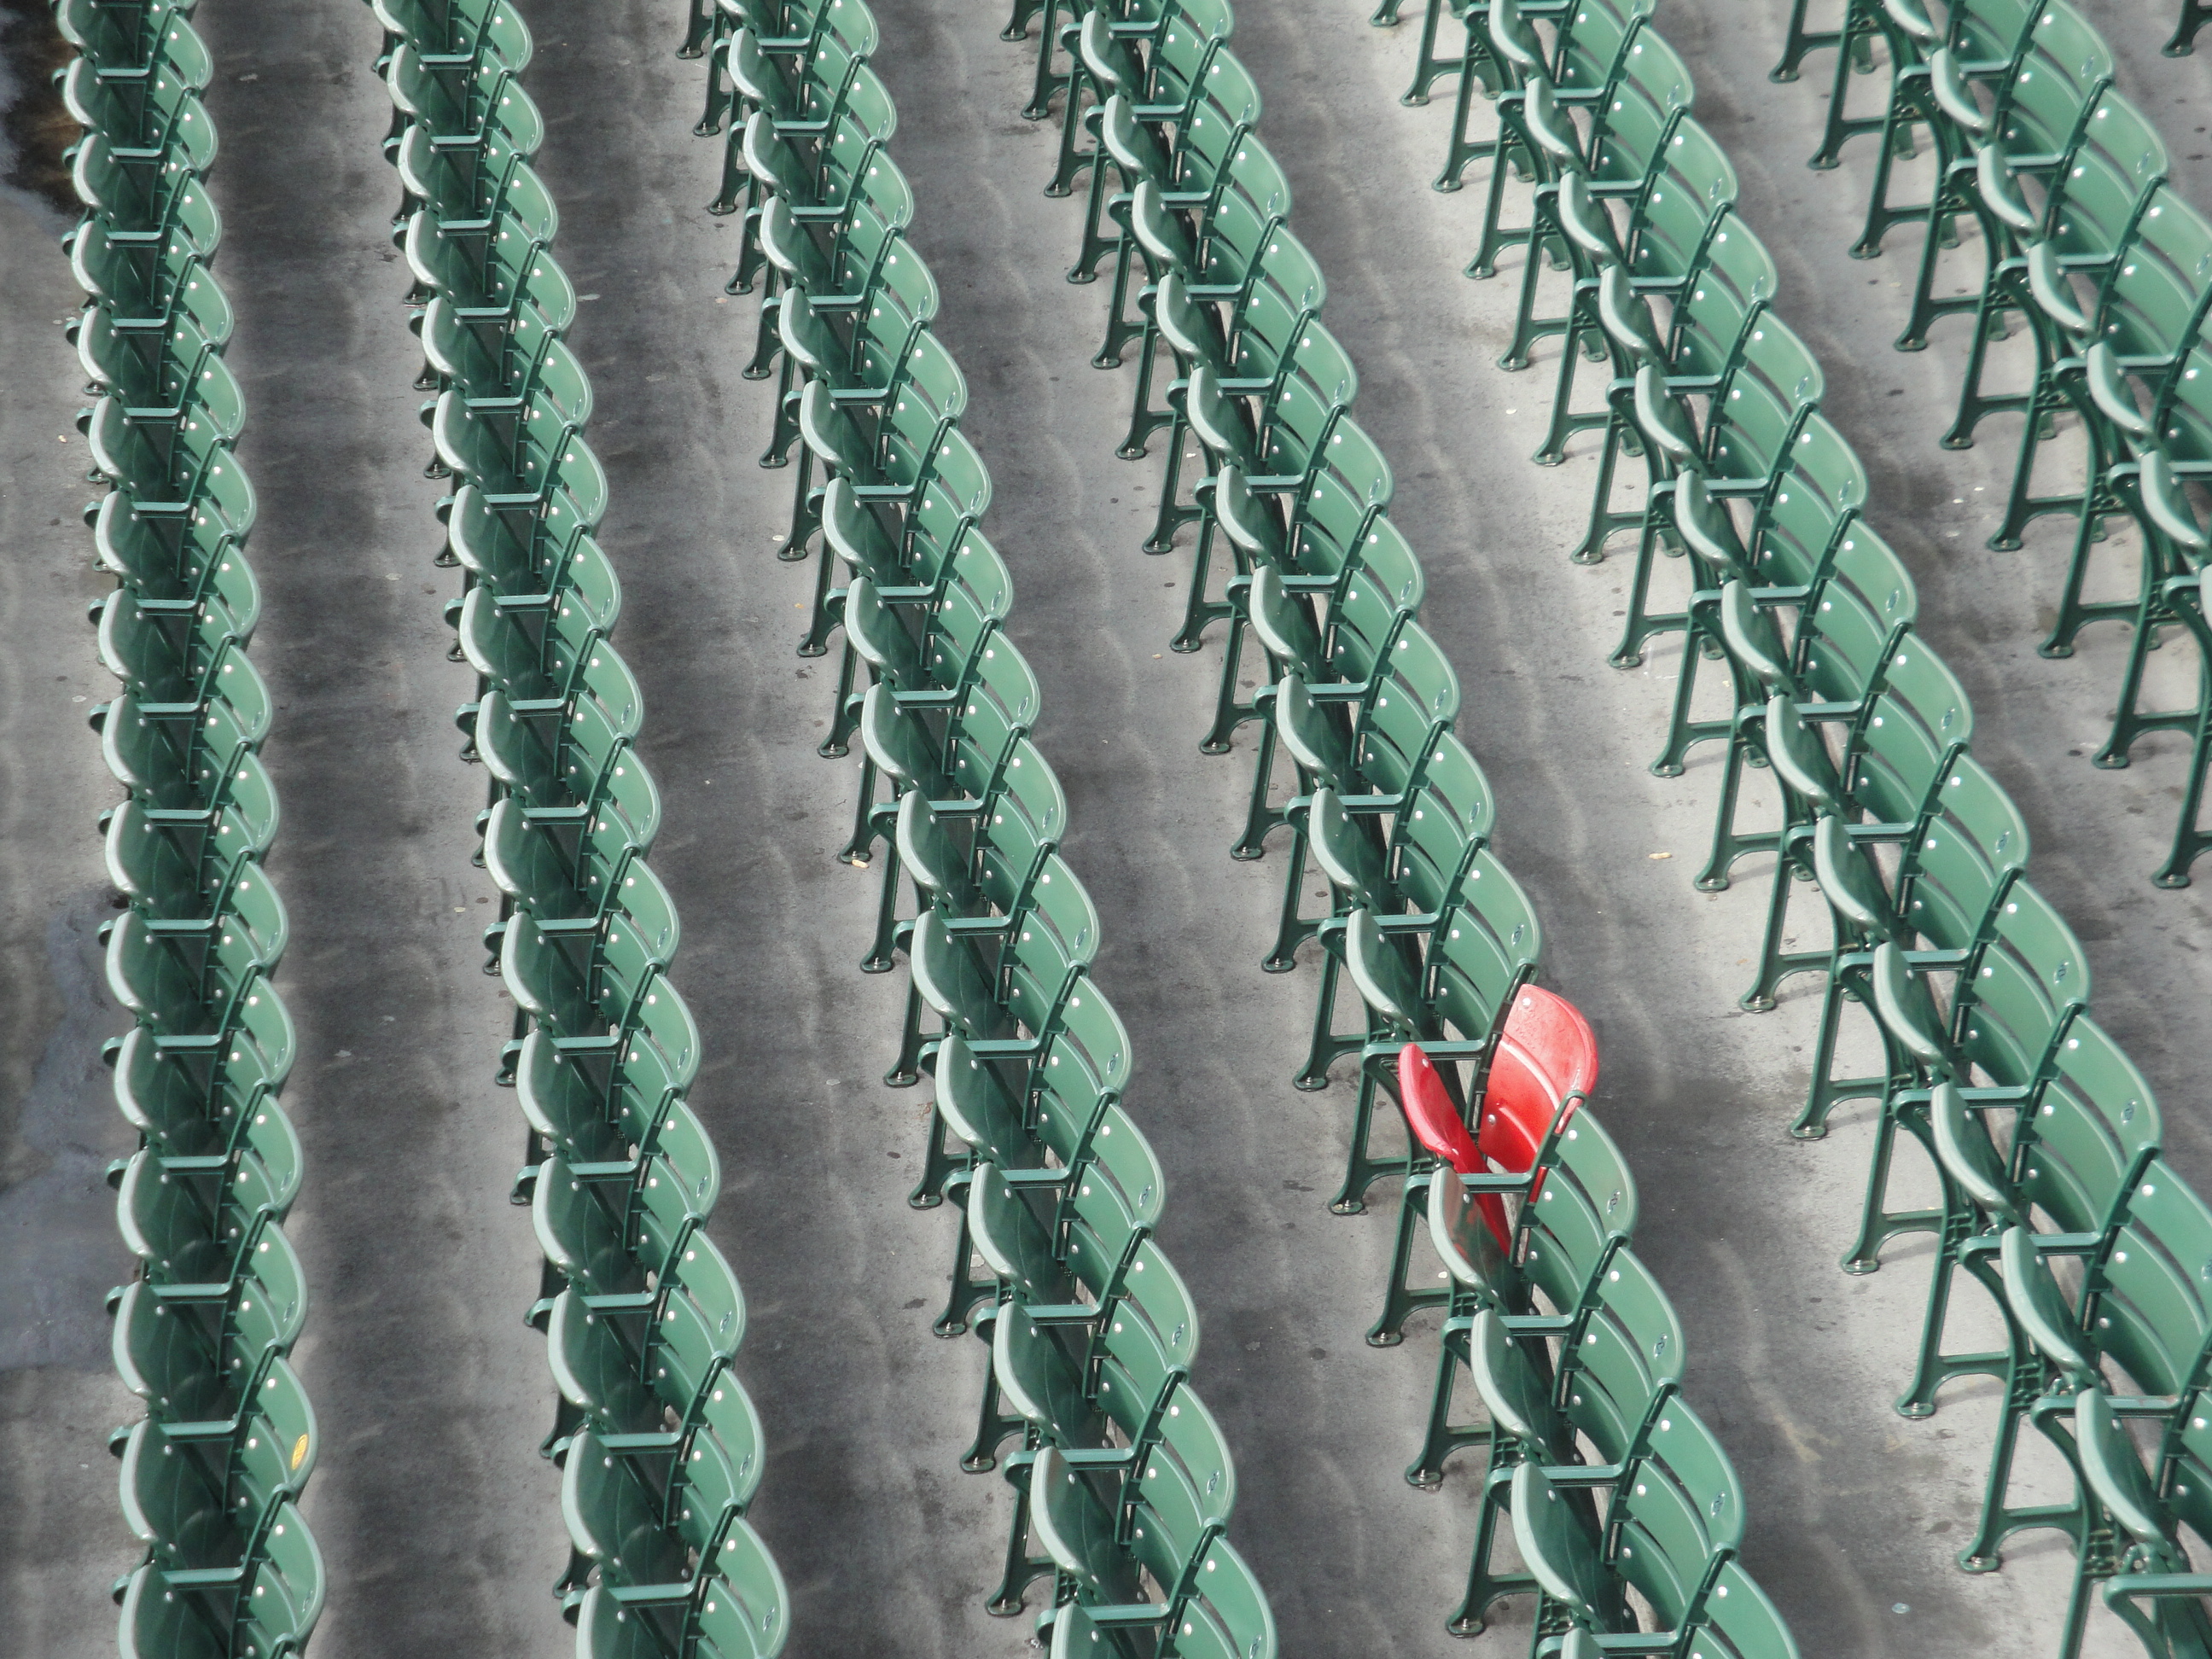 Red Seat at Fenway Park